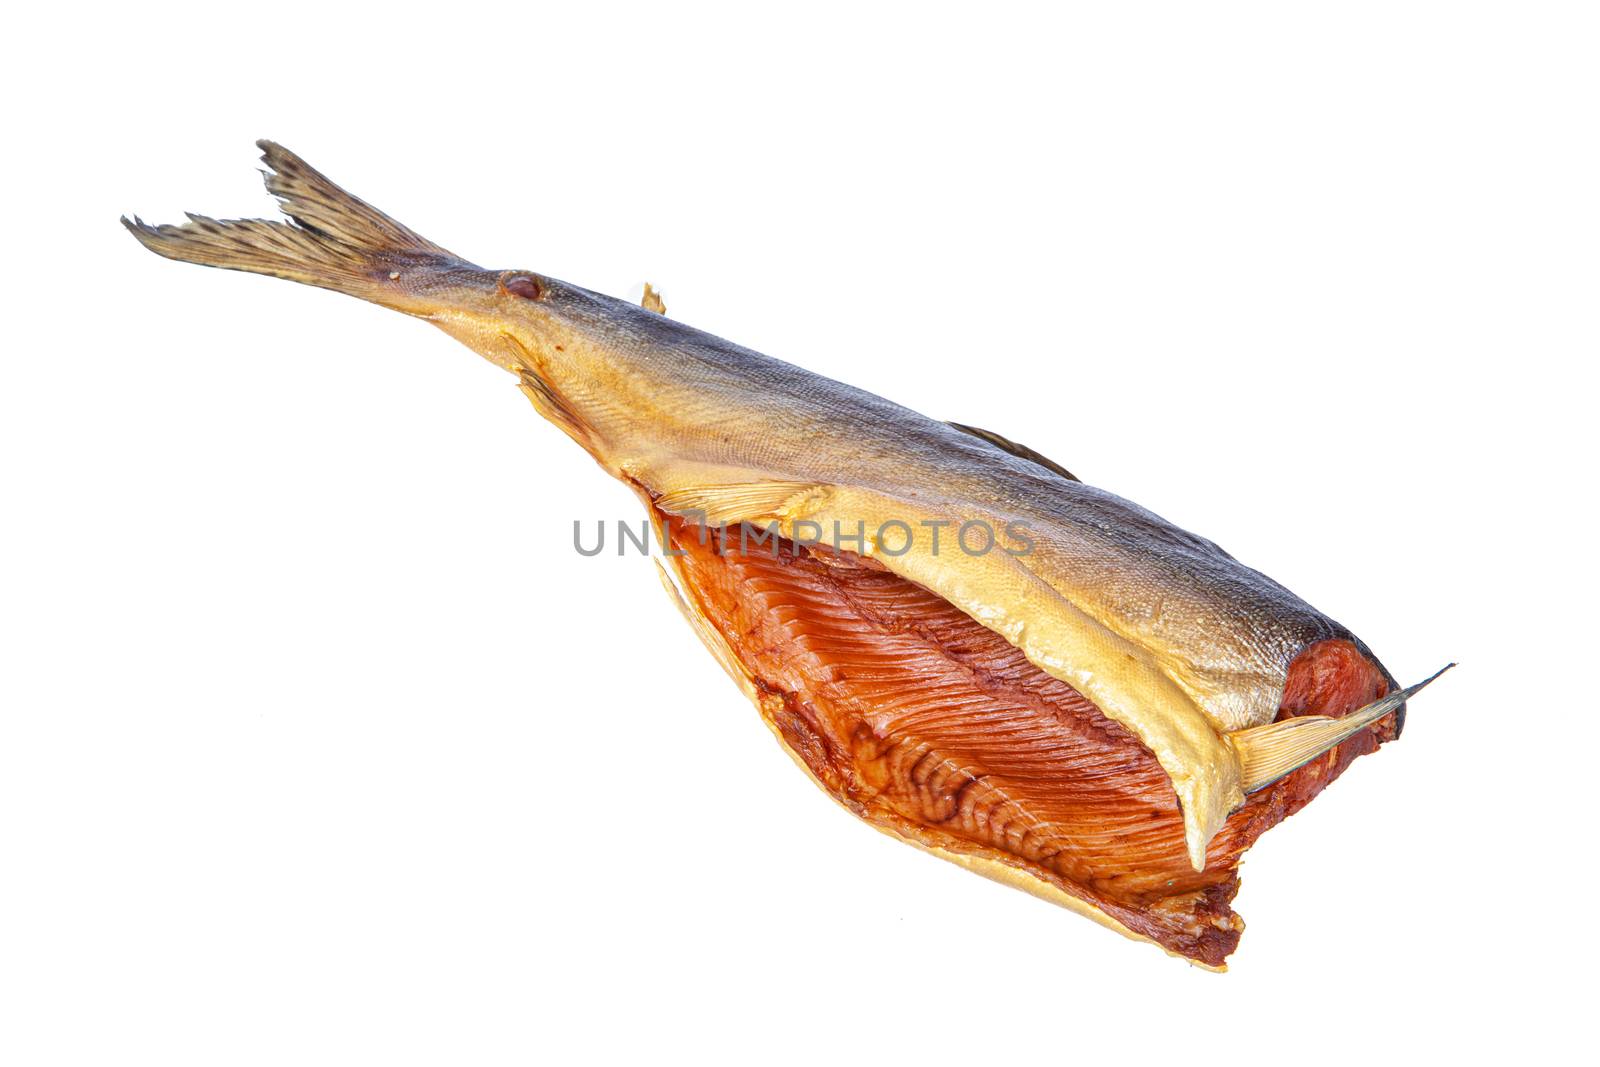 Smoked red fish on an isolated studio background